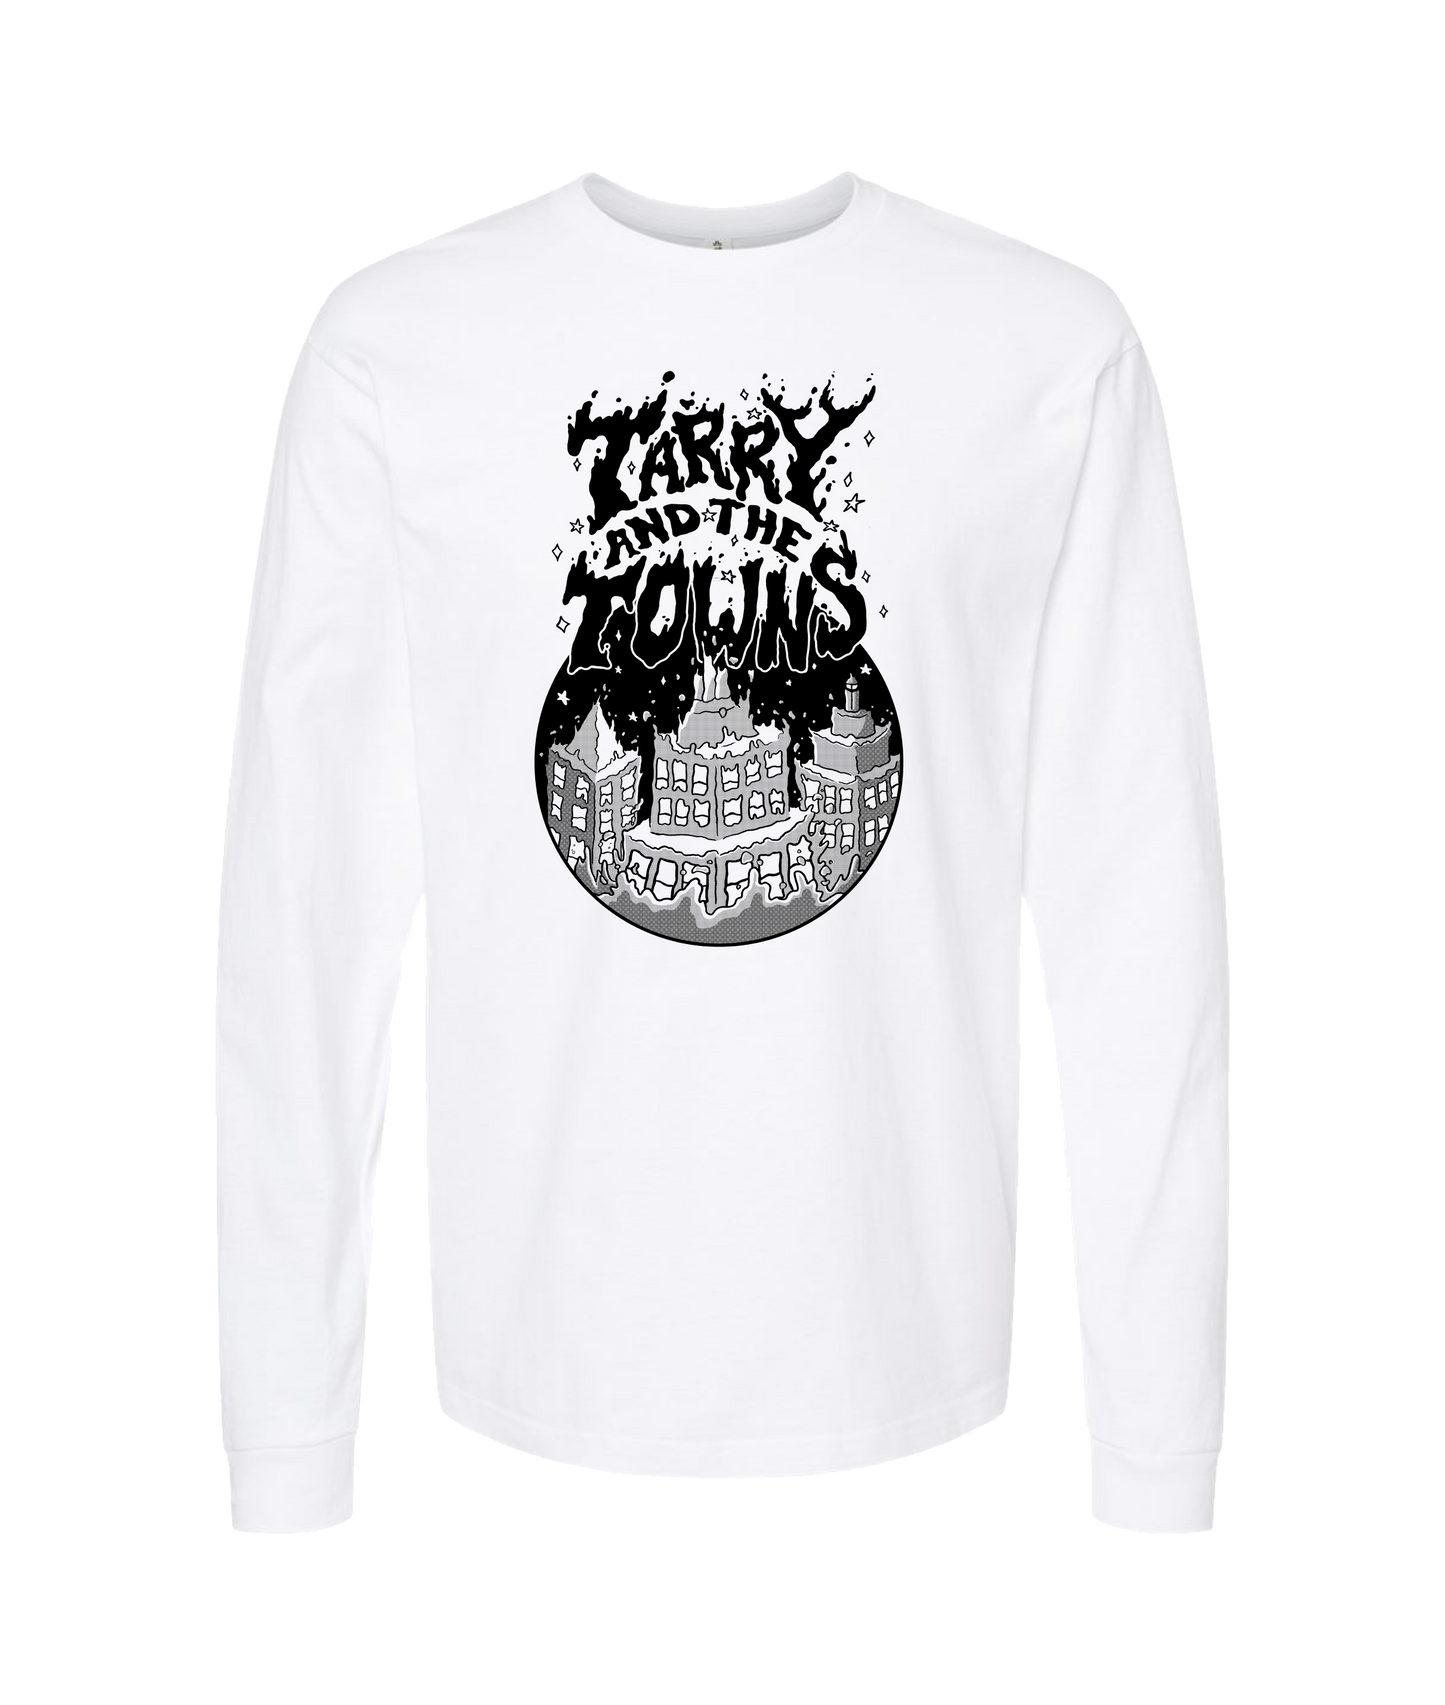 Tarry and the Towns - Inky - White Long Sleeve T